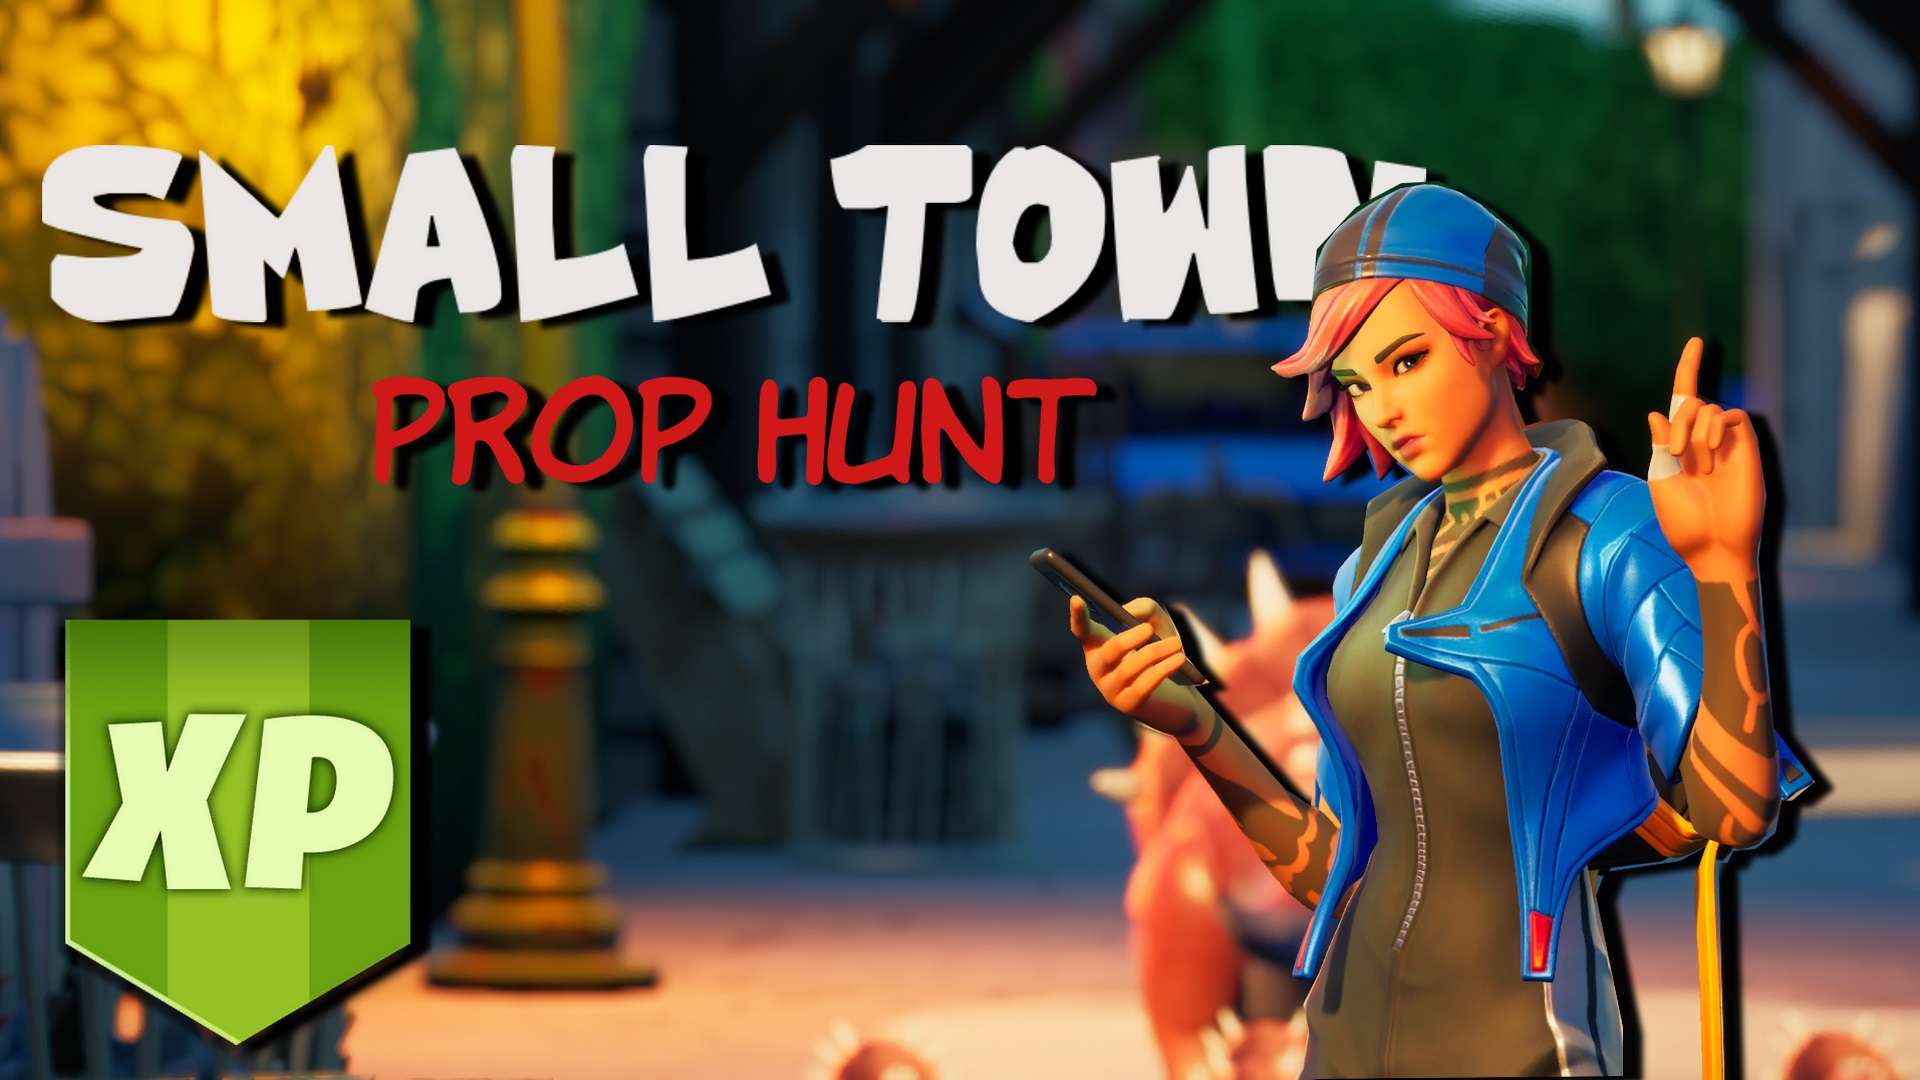 PROP HUNT: SMALL TOWN